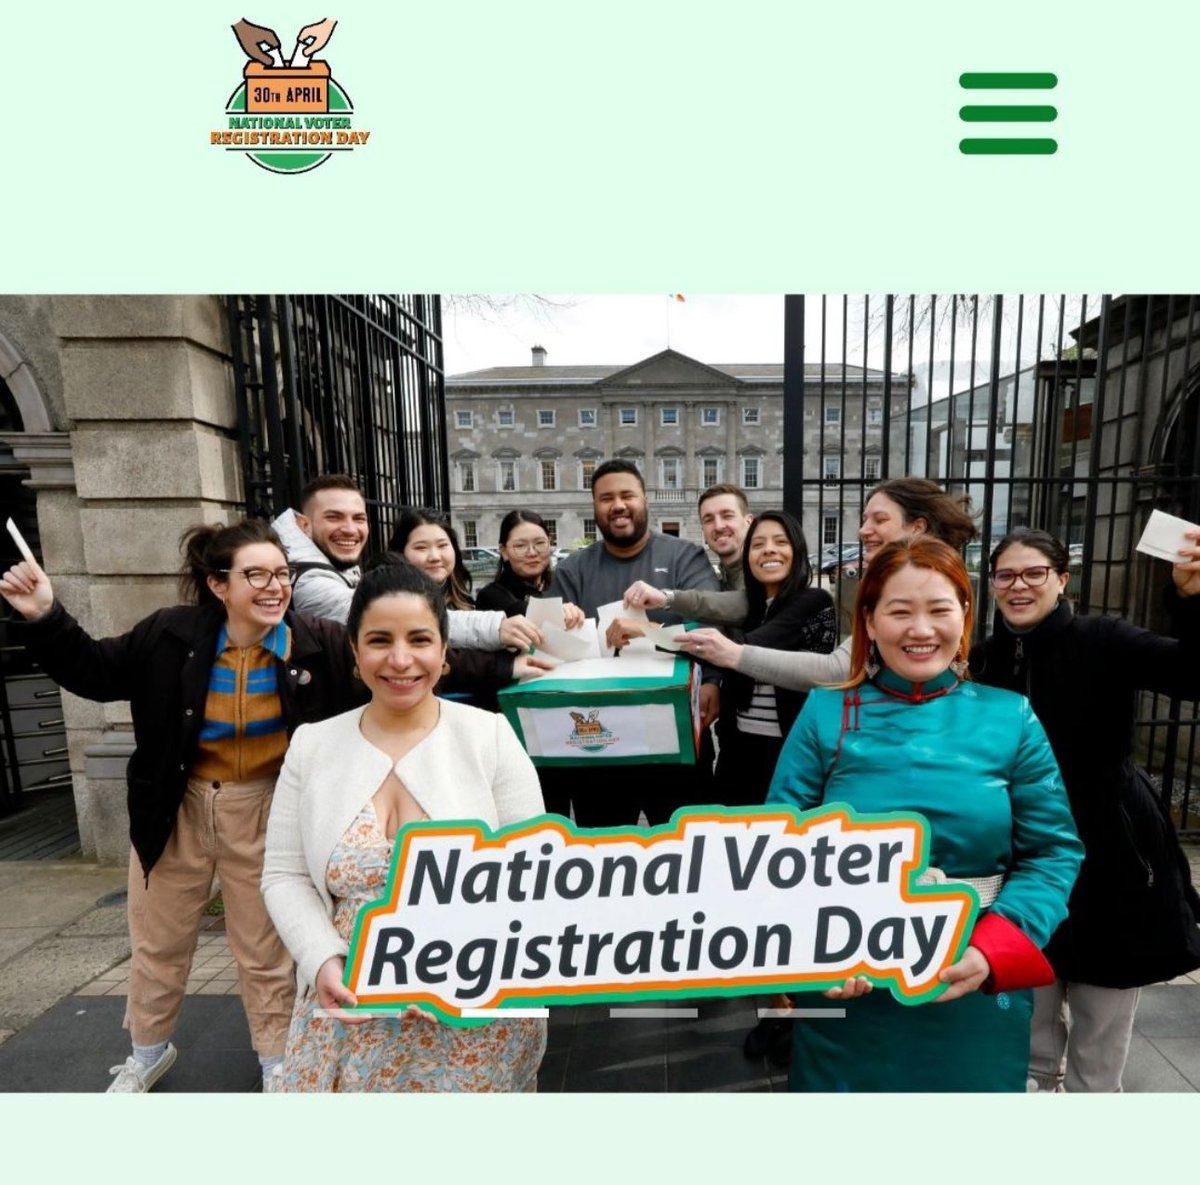 Partnering with @Black_andirish & @ICOSirl today at the @MansionHouseDub to ensure all voices are heard in the upcoming elections. There is huge awareness raising for minority groups in the #NationalVoterRegistrationDay This is important to our mission of #EqualityForAll.…